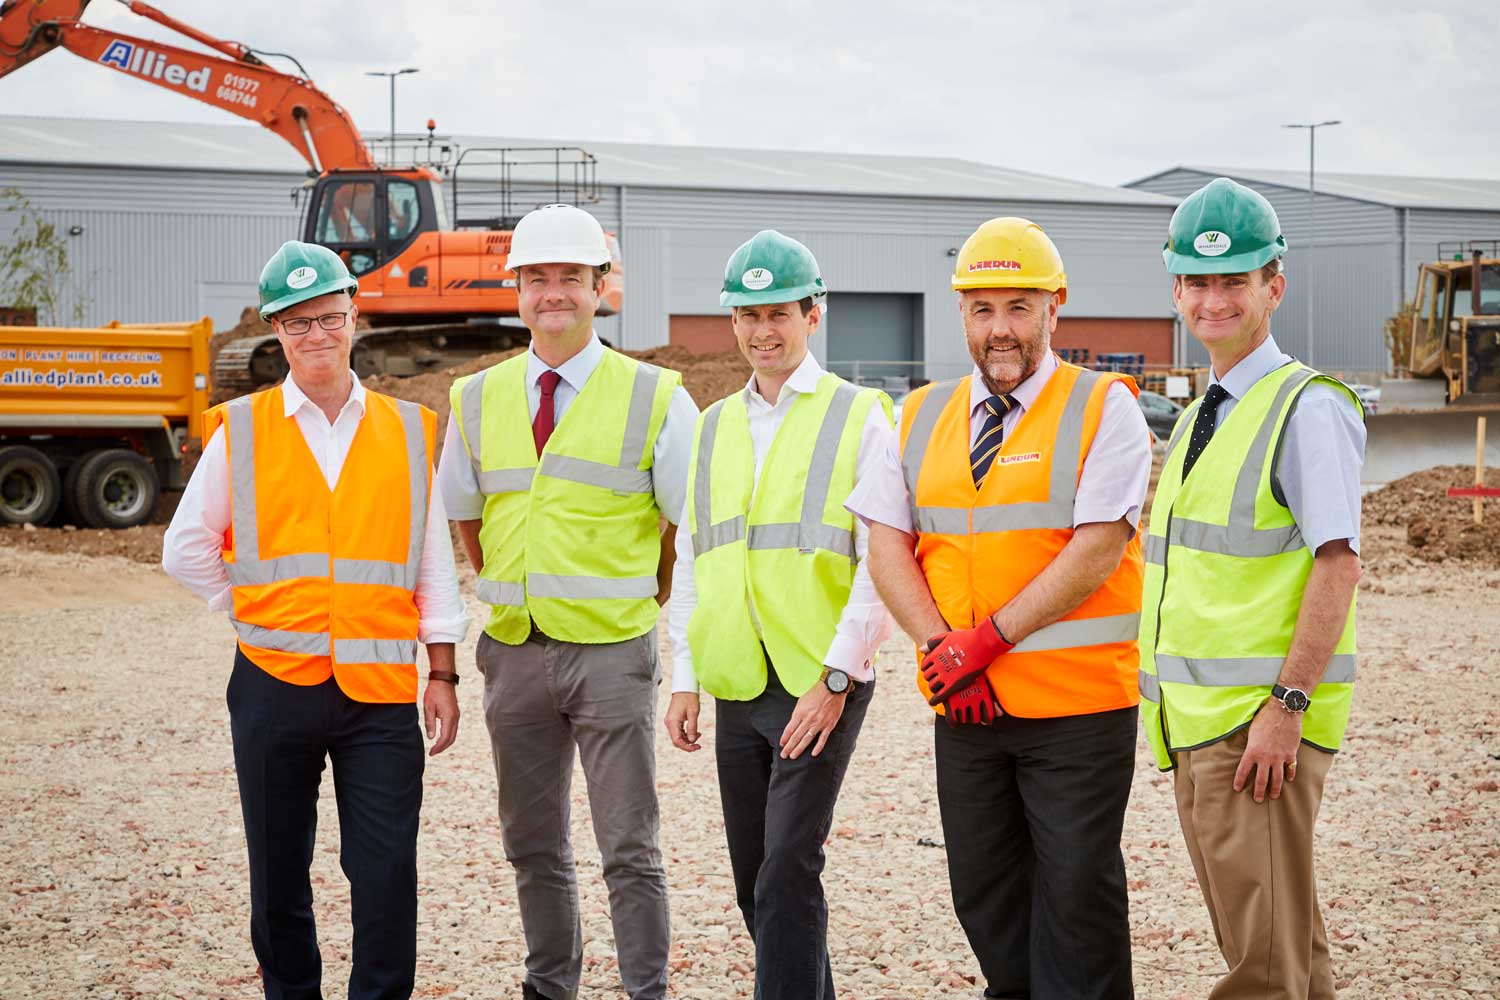 at the start of work on Ash Way III are Rockspring Hanover Property Unit Trust director, Shaun Hose; Bon Bon’s founder and general manager, Mark Rowntree and Wharfedale Property Management director, Tim Munns